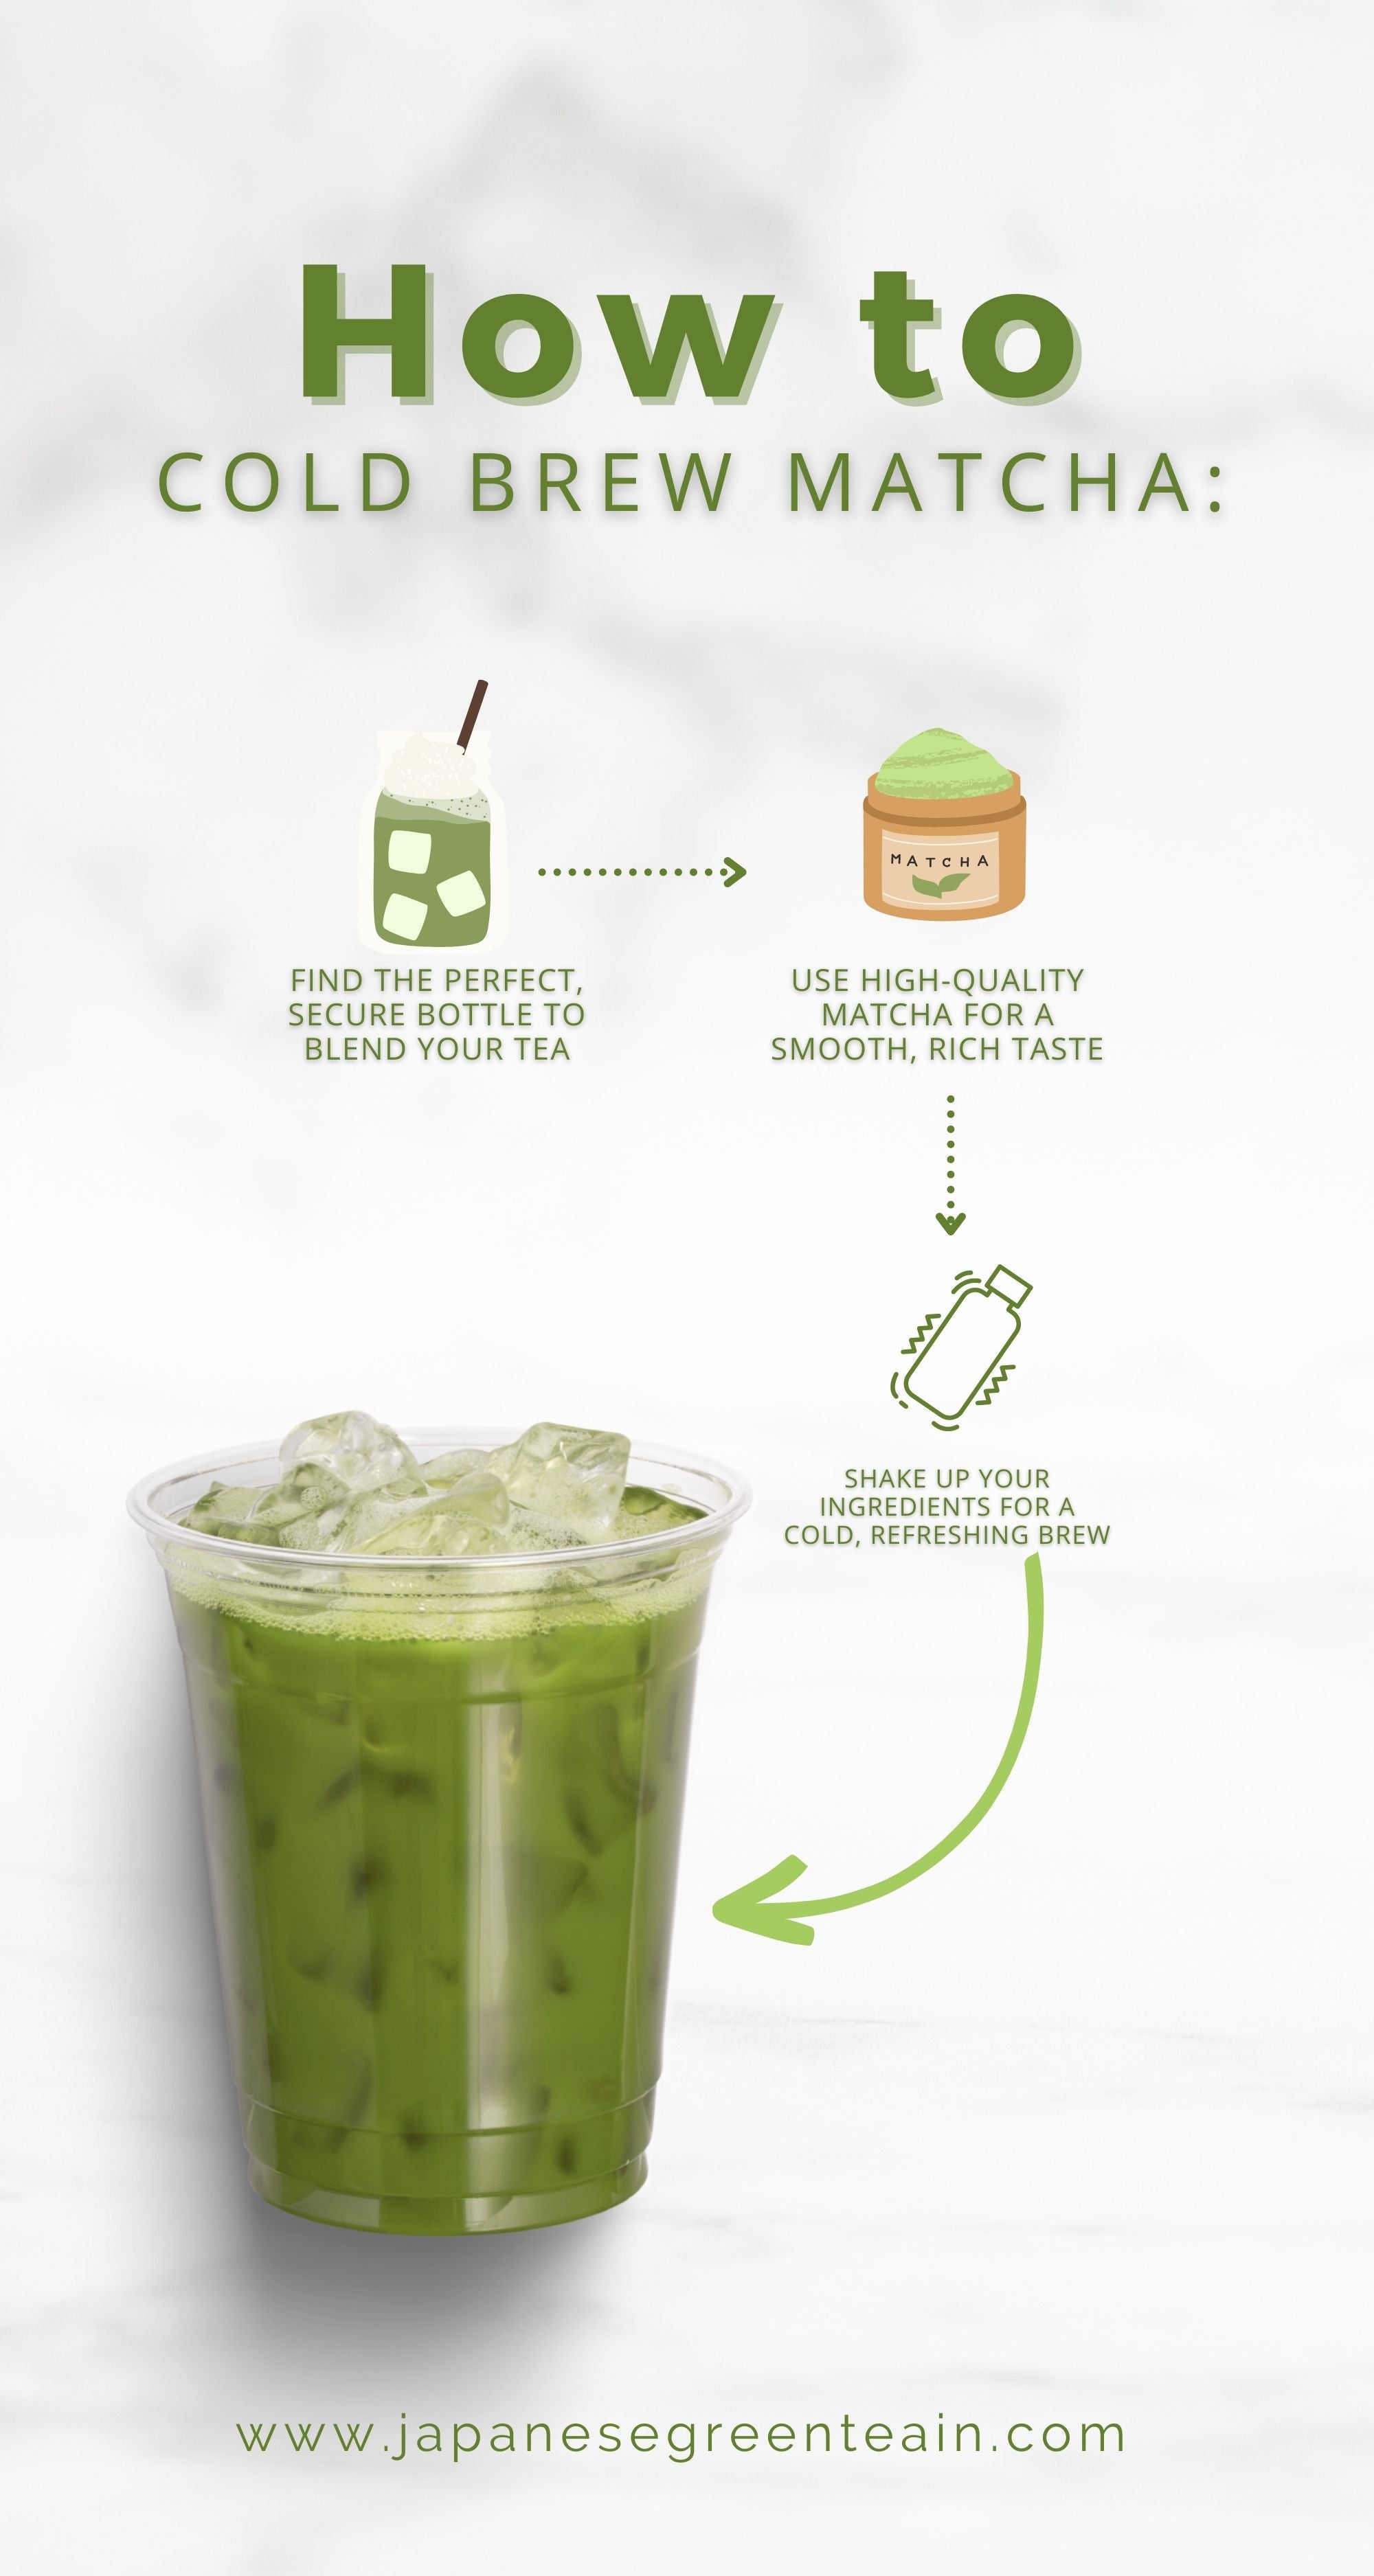 Cool Down with a Refreshing Cup of Cold Brew Matcha: A Step-by-Step Guide